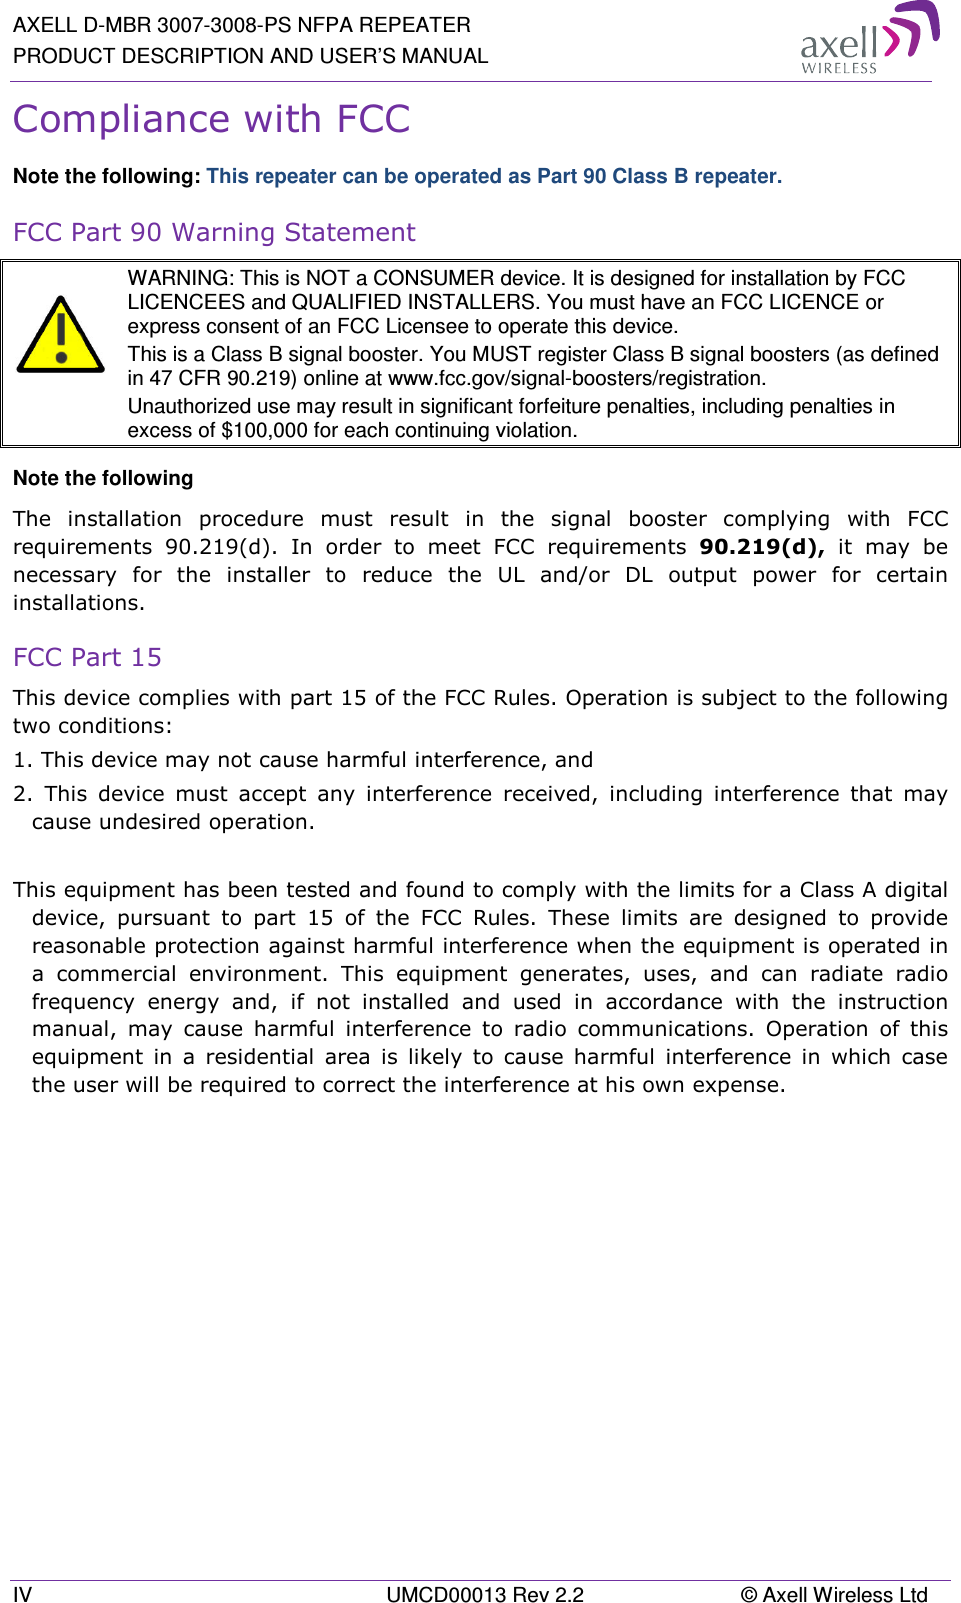 AXELL D-MBR 3007-3008-PS NFPA REPEATER PRODUCT DESCRIPTION AND USER’S MANUAL IV  UMCD00013 Rev 2.2  © Axell Wireless Ltd Compliance with FCC Note the following: This repeater can be operated as Part 90 Class B repeater. FCC Part 90 Warning Statement   WARNING: This is NOT a CONSUMER device. It is designed for installation by FCC LICENCEES and QUALIFIED INSTALLERS. You must have an FCC LICENCE or express consent of an FCC Licensee to operate this device.  This is a Class B signal booster. You MUST register Class B signal boosters (as defined in 47 CFR 90.219) online at www.fcc.gov/signal-boosters/registration.  Unauthorized use may result in significant forfeiture penalties, including penalties in excess of $100,000 for each continuing violation. Note the following The  installation  procedure  must  result  in  the  signal  booster  complying  with  FCC requirements  90.219(d).  In  order  to  meet  FCC  requirements  90.219(d),  it  may  be necessary  for  the  installer  to  reduce  the  UL  and/or  DL  output  power  for  certain installations. FCC Part 15 This device complies with part 15 of the FCC Rules. Operation is subject to the following two conditions:  1. This device may not cause harmful interference, and   2.  This  device  must  accept  any  interference  received,  including  interference  that  may cause undesired operation.   This equipment has been tested and found to comply with the limits for a Class A digital device,  pursuant  to  part  15  of  the  FCC  Rules.  These  limits  are  designed  to  provide reasonable protection against harmful interference when the equipment is operated in a  commercial  environment.  This  equipment  generates,  uses,  and  can  radiate  radio frequency  energy  and,  if  not  installed  and  used  in  accordance  with  the  instruction manual,  may  cause  harmful  interference  to  radio  communications.  Operation  of  this equipment  in  a  residential  area  is  likely  to  cause  harmful  interference  in  which  case the user will be required to correct the interference at his own expense.    